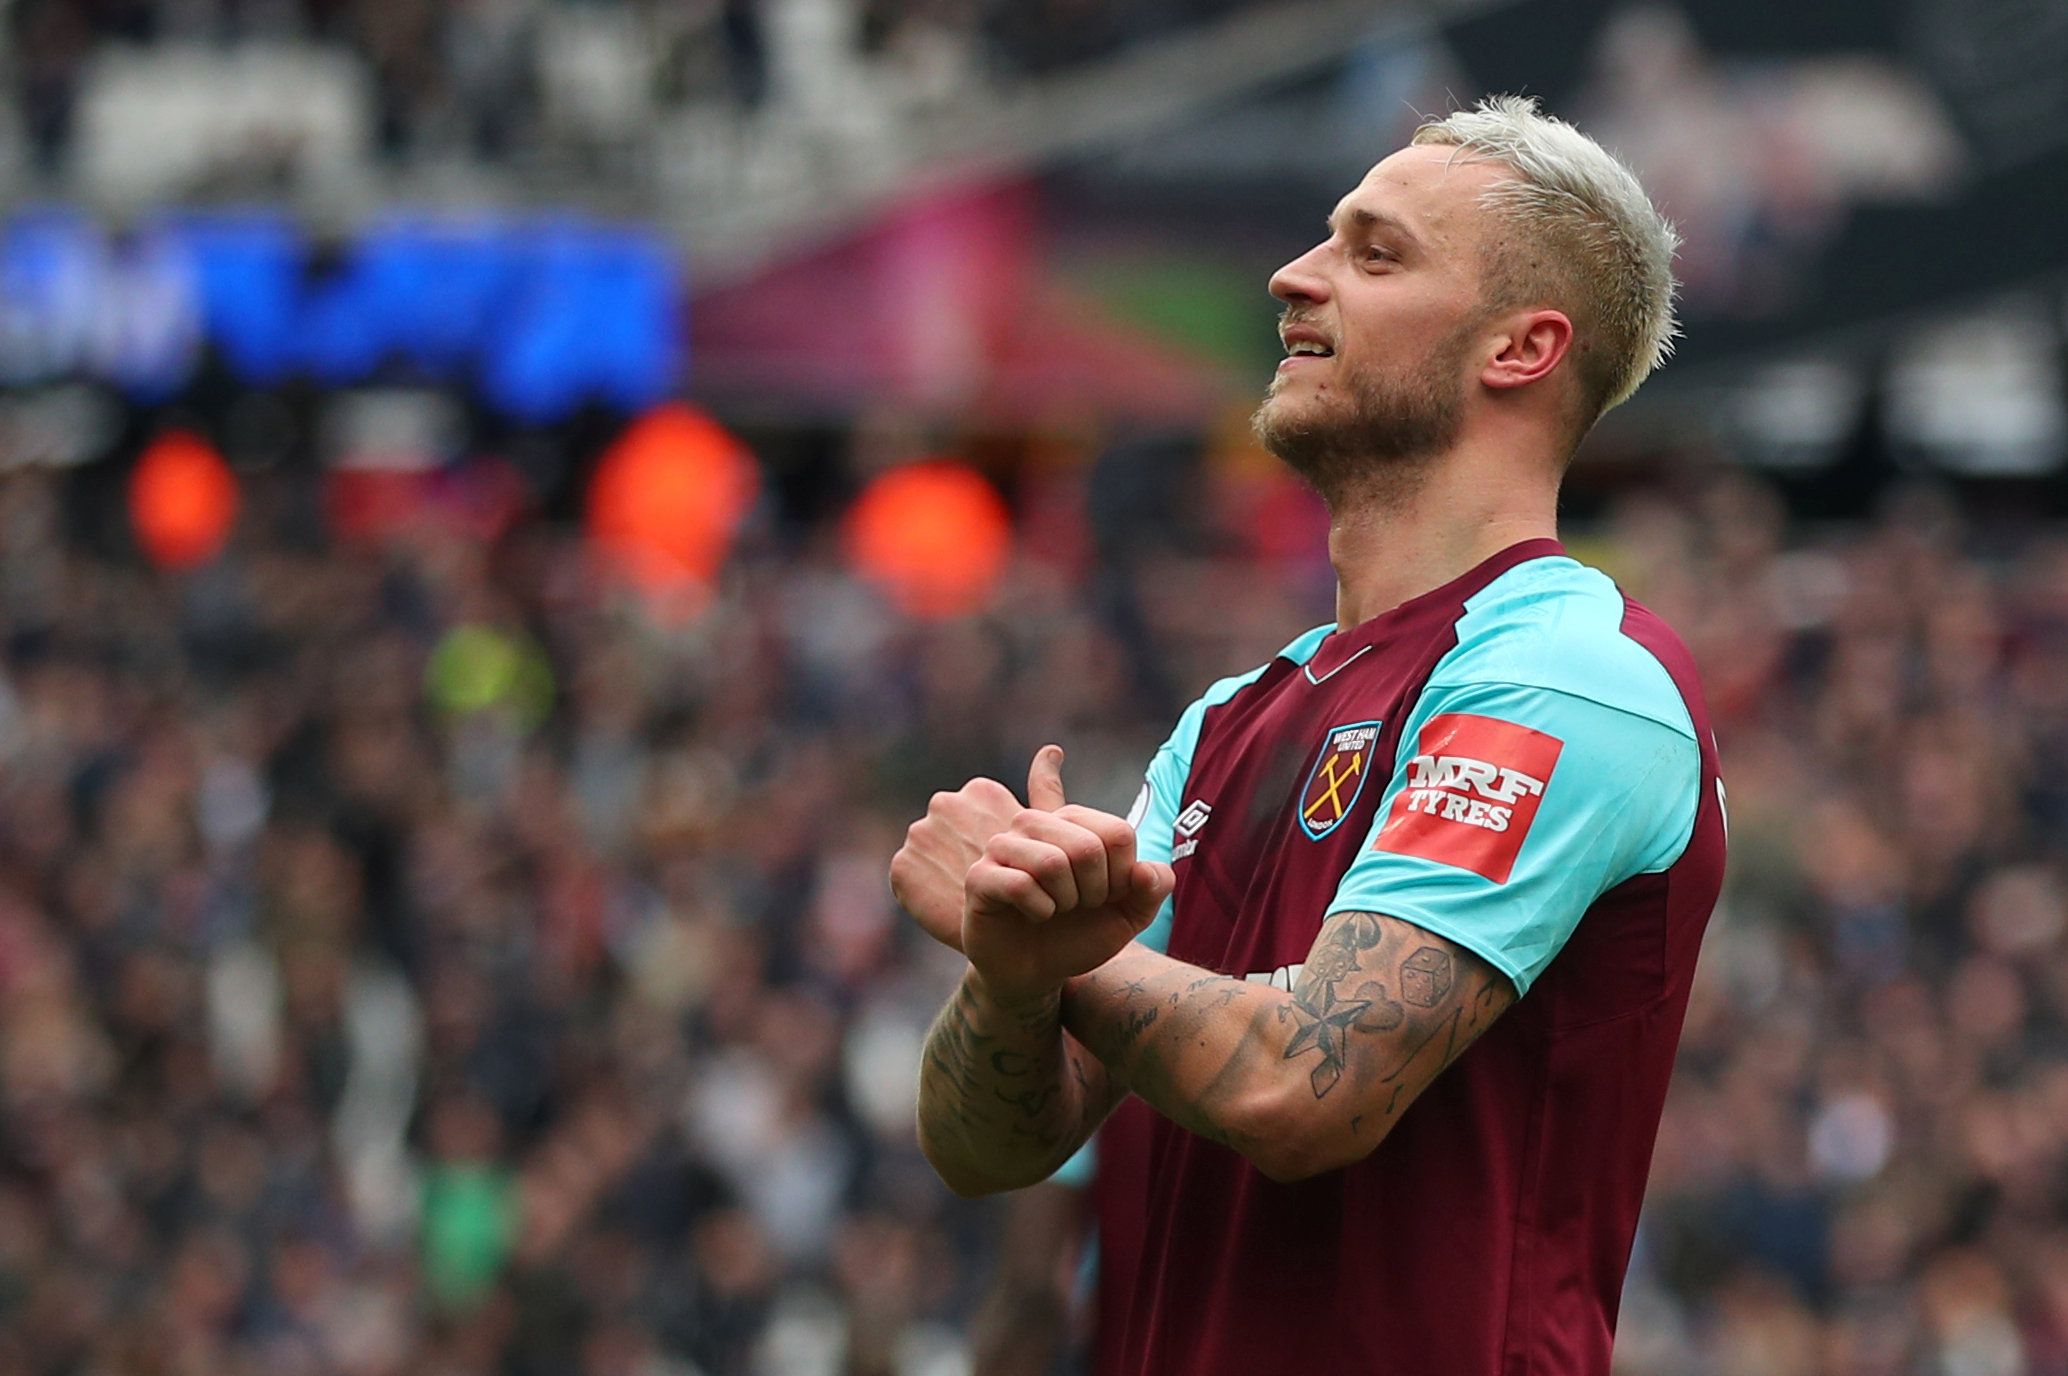 Soccer Football - Premier League - West Ham United vs Southampton - London Stadium, London, Britain - March 31, 2018   West Ham United's Marko Arnautovic celebrates scoring their third goal                    REUTERS/Hannah Mckay    EDITORIAL USE ONLY. No use with unauthorized audio, video, data, fixture lists, club/league logos or "live" services. Online in-match use limited to 75 images, no video emulation. No use in betting, games or single club/league/player publications.  Please contact you